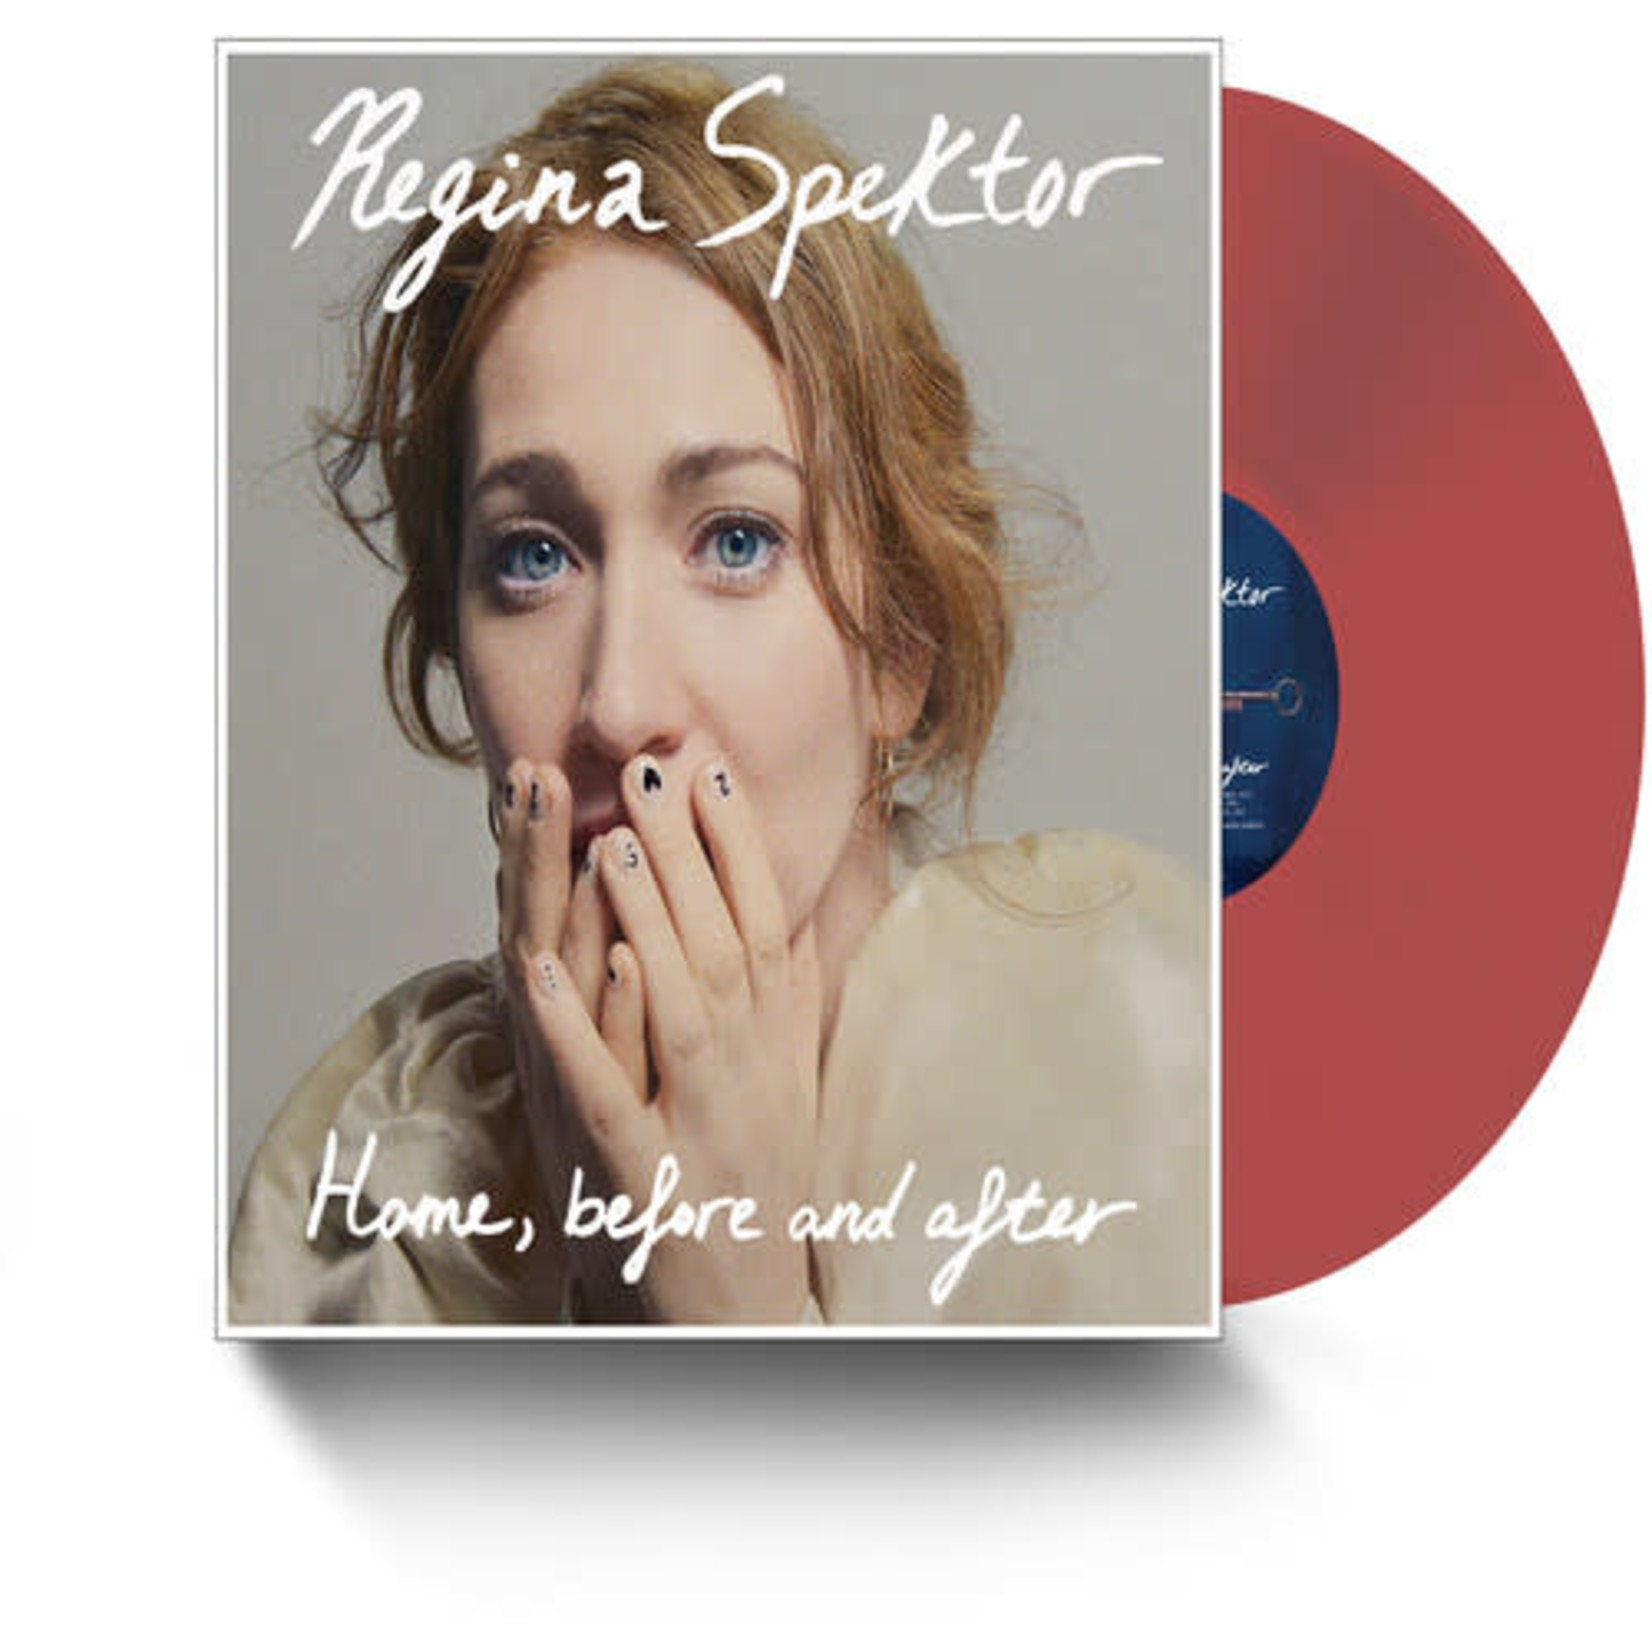 Sire Regina Spektor - Home Before and After (LP) [Ruby]